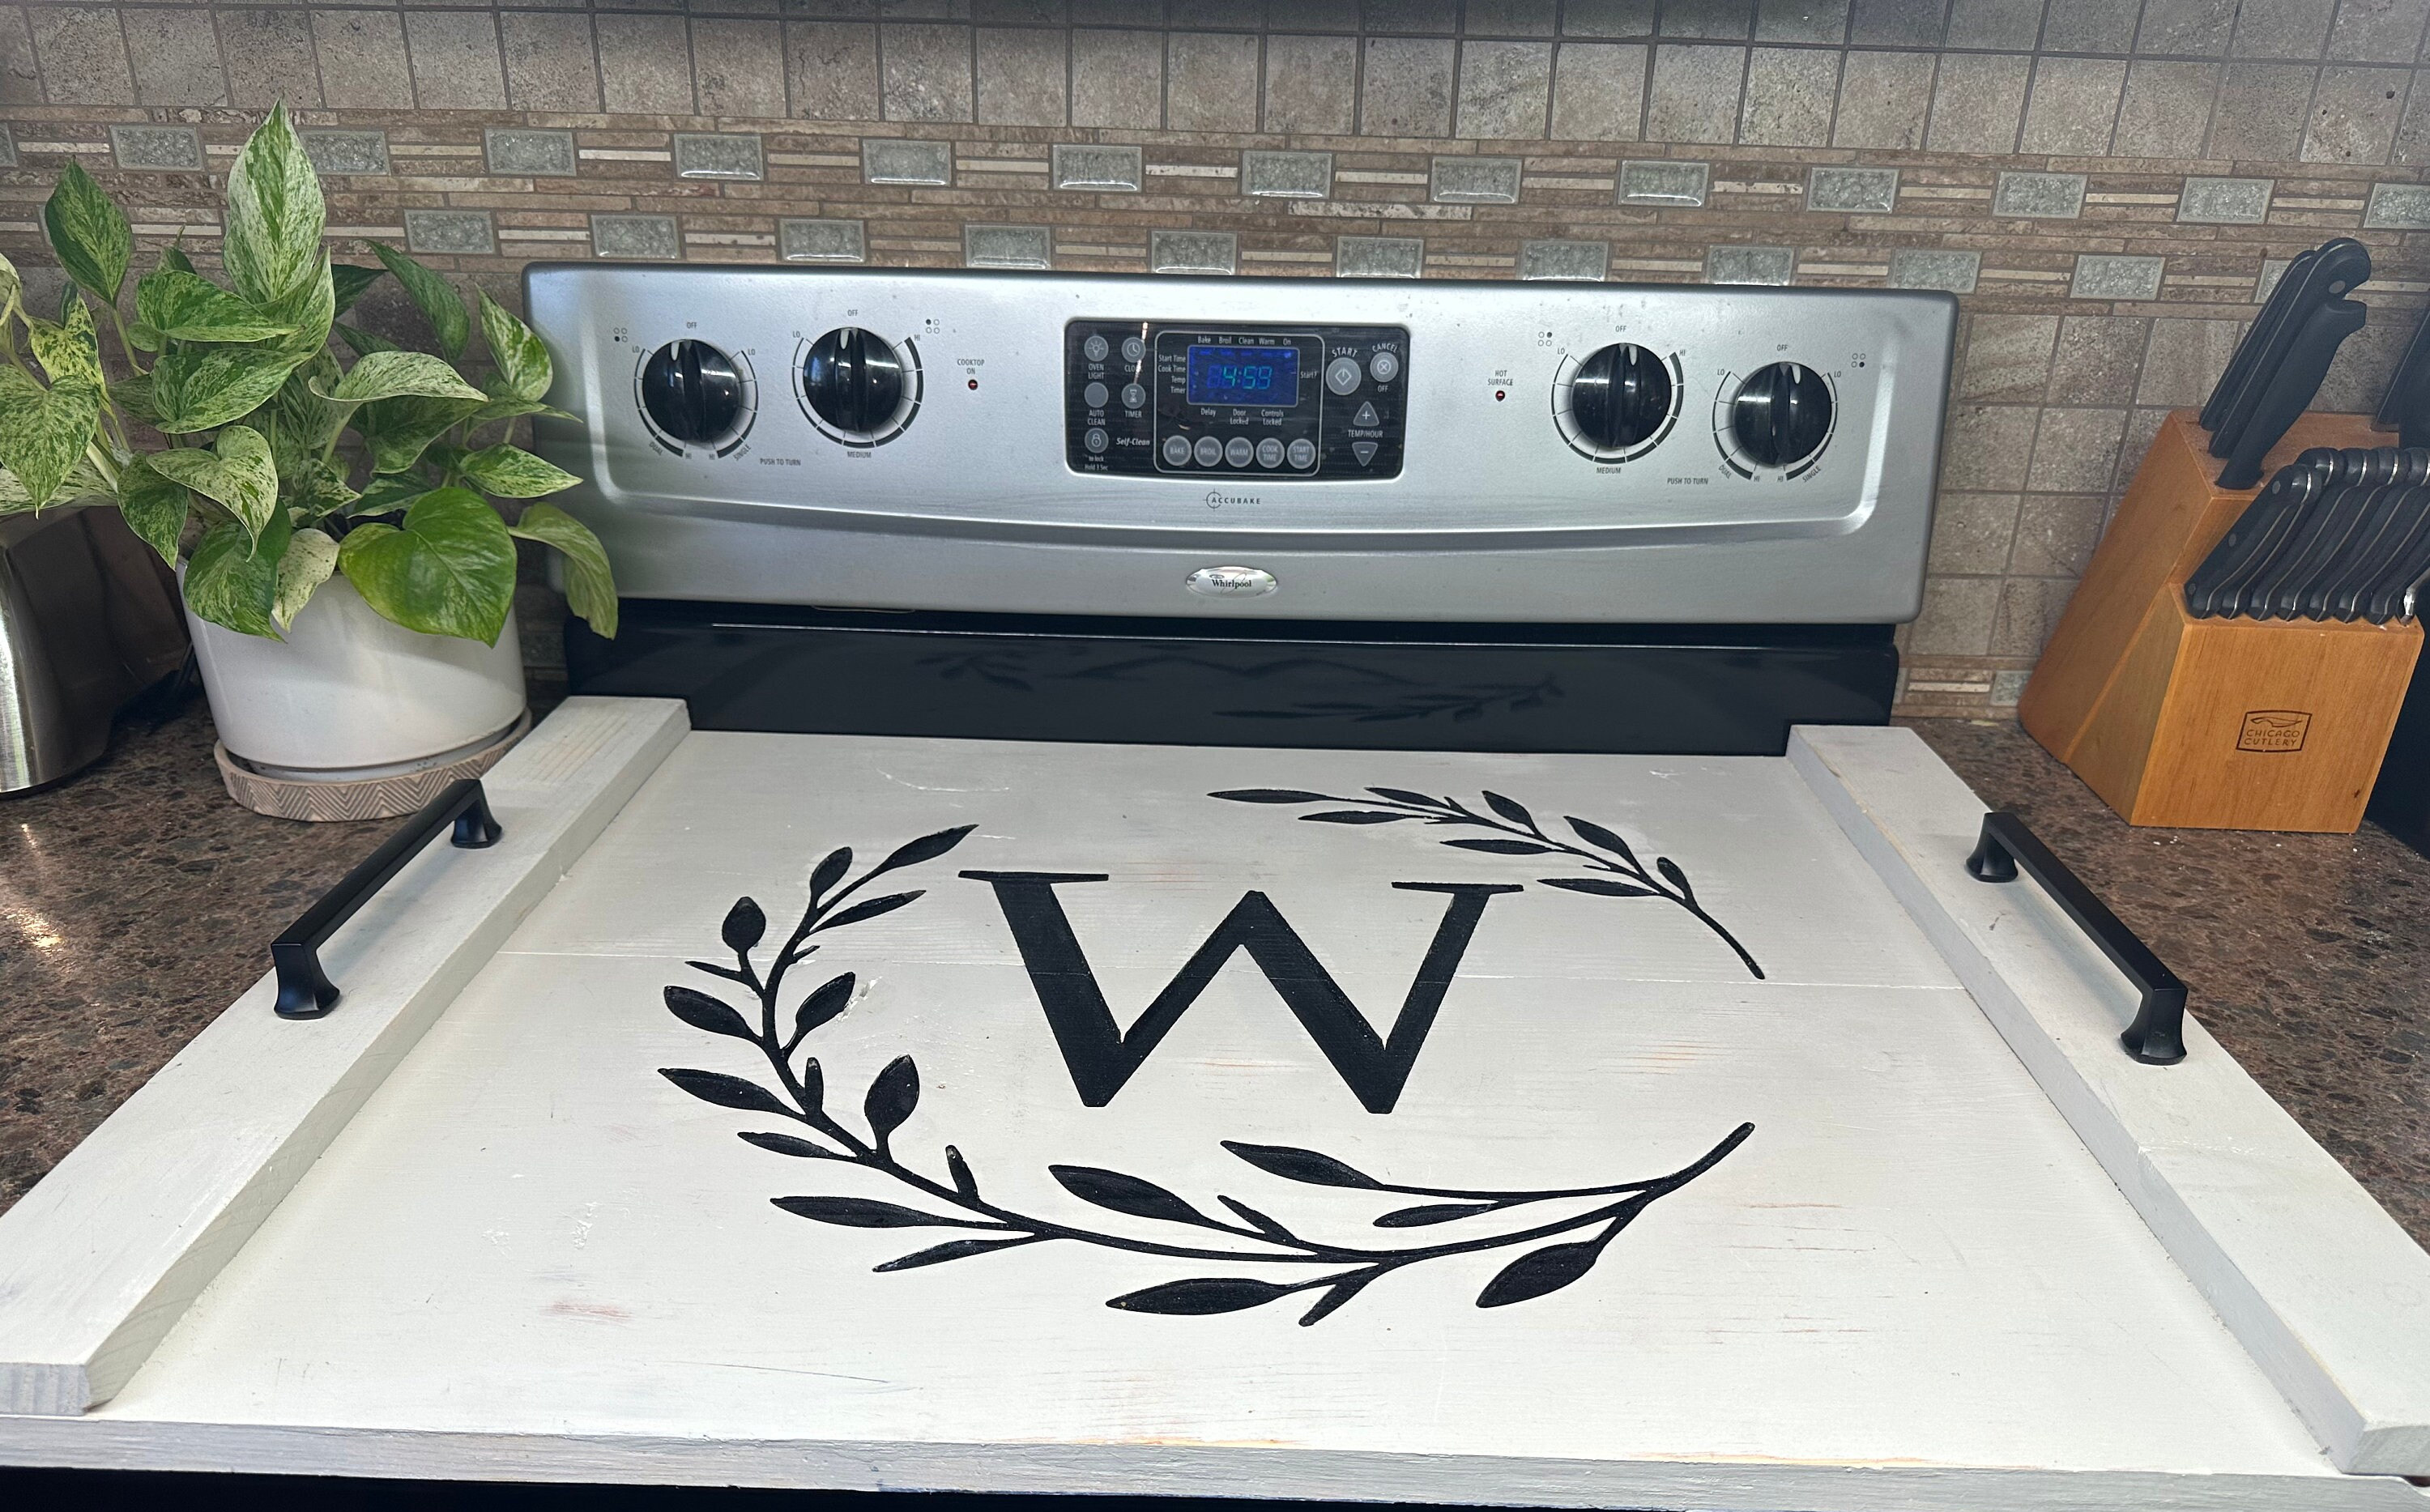 Stove Top Cover - White and Black Scroll, Cooktop Cover